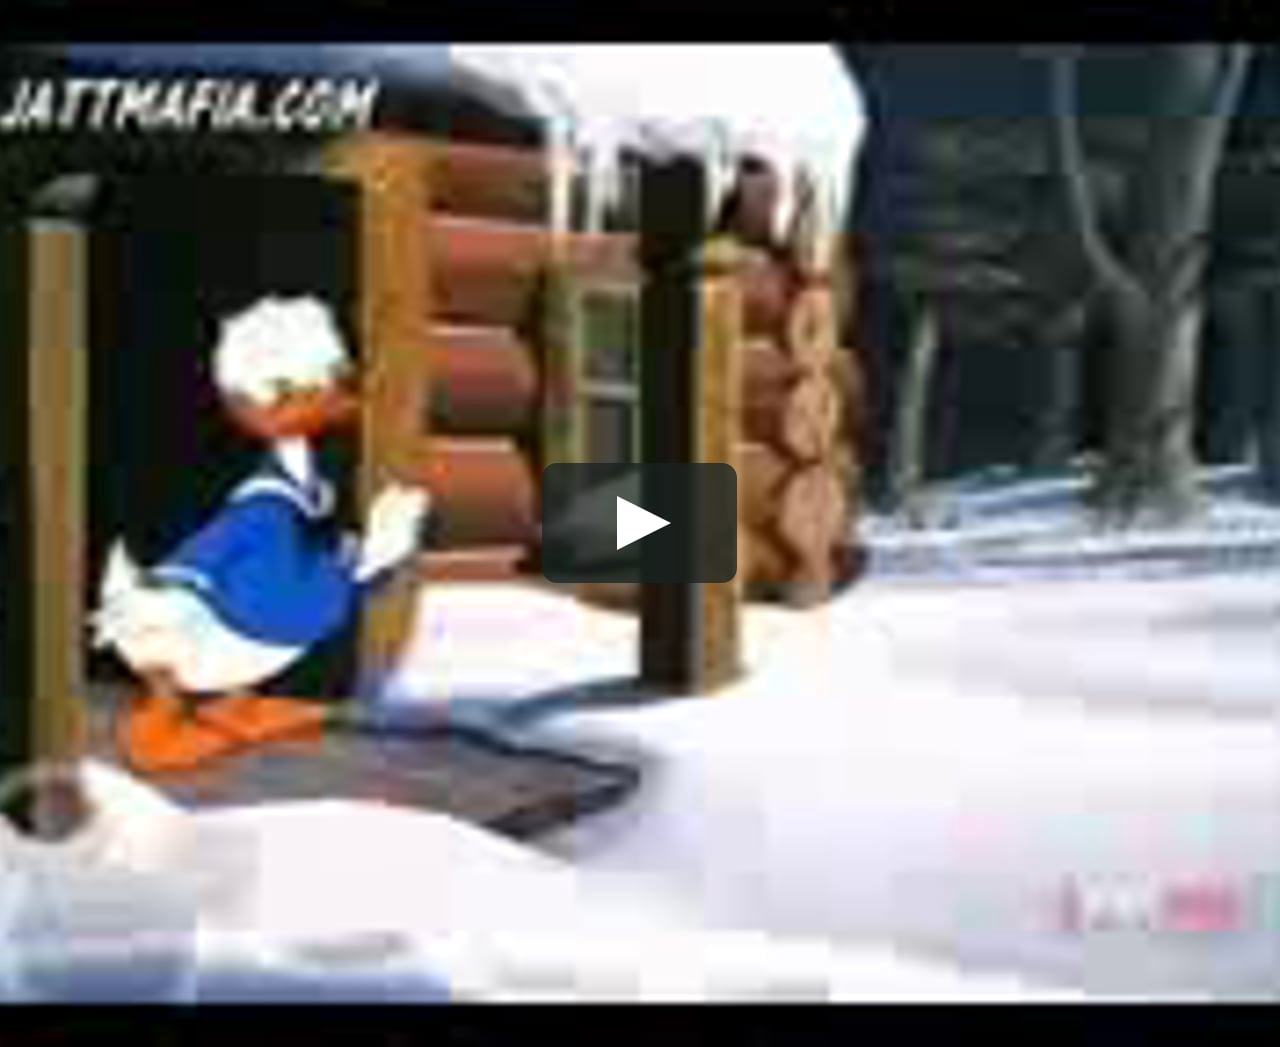 donald duck cartoon in hindi episode chip and dale for mobile on Vimeo